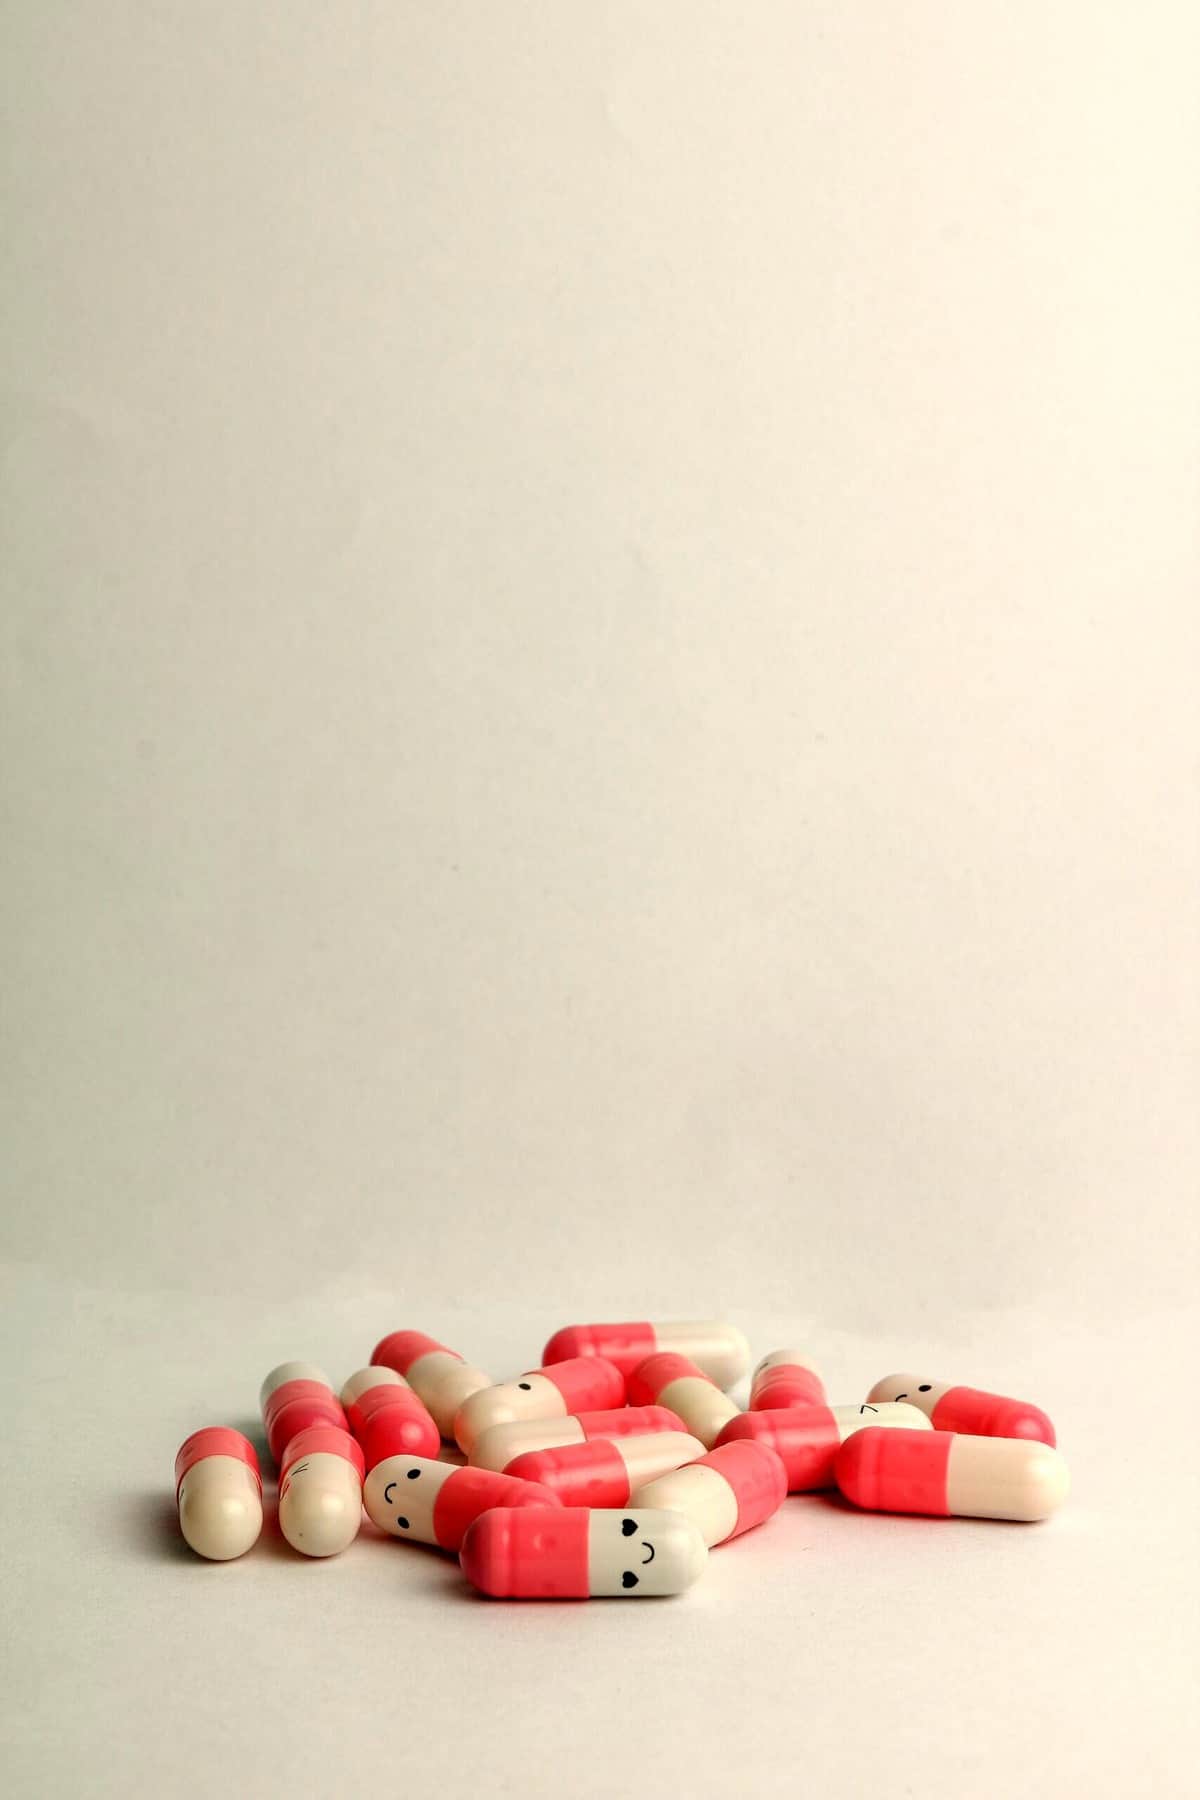 Several supplements with smiley faces on a white surface.